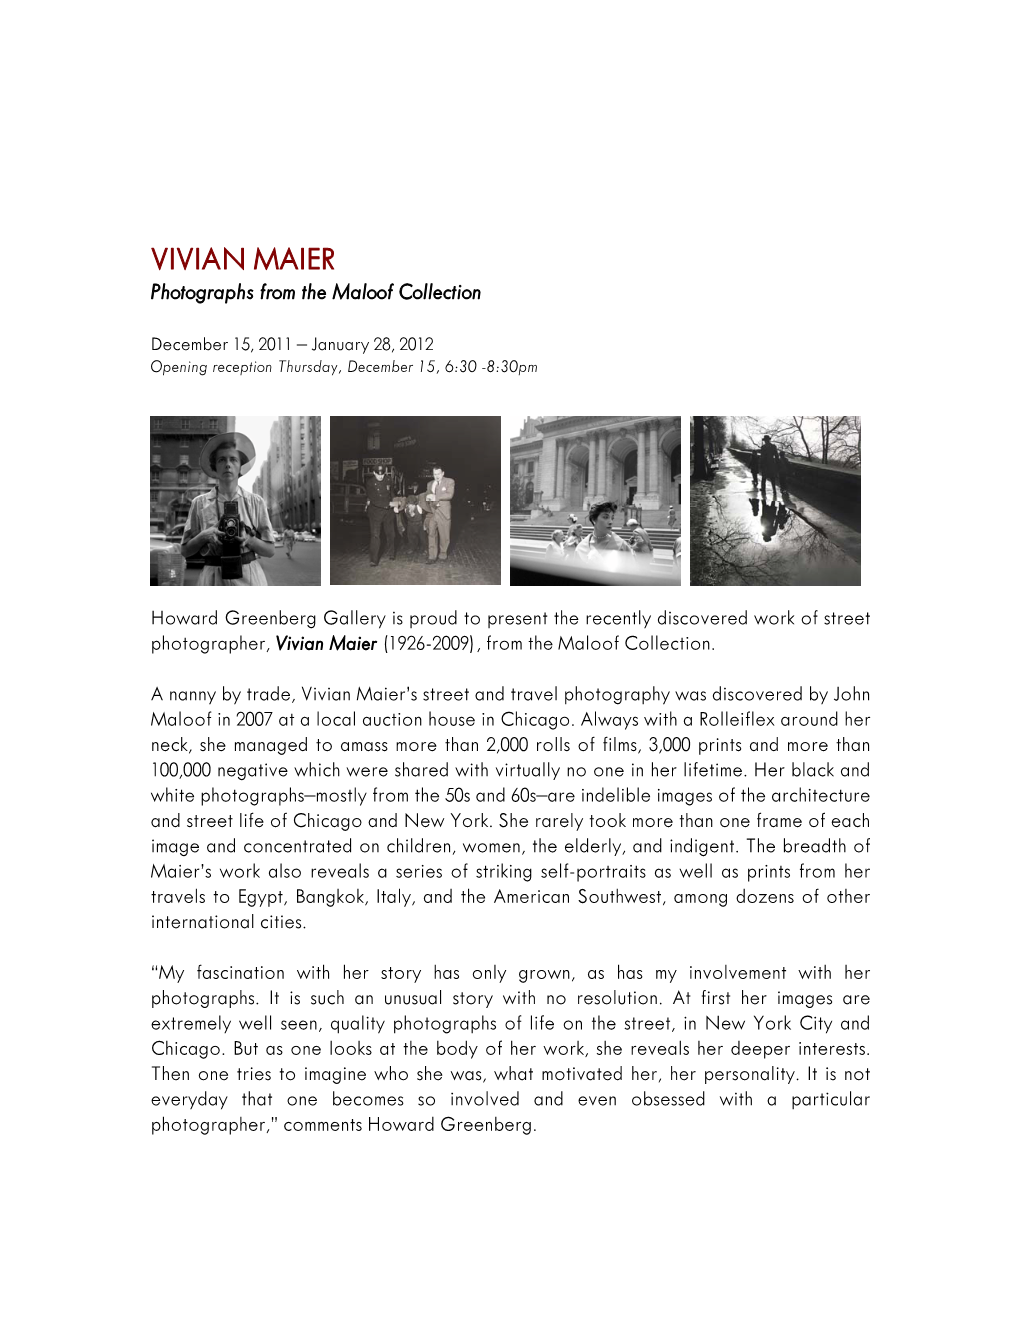 VIVIAN MAIER Photographs from the Maloof Collection